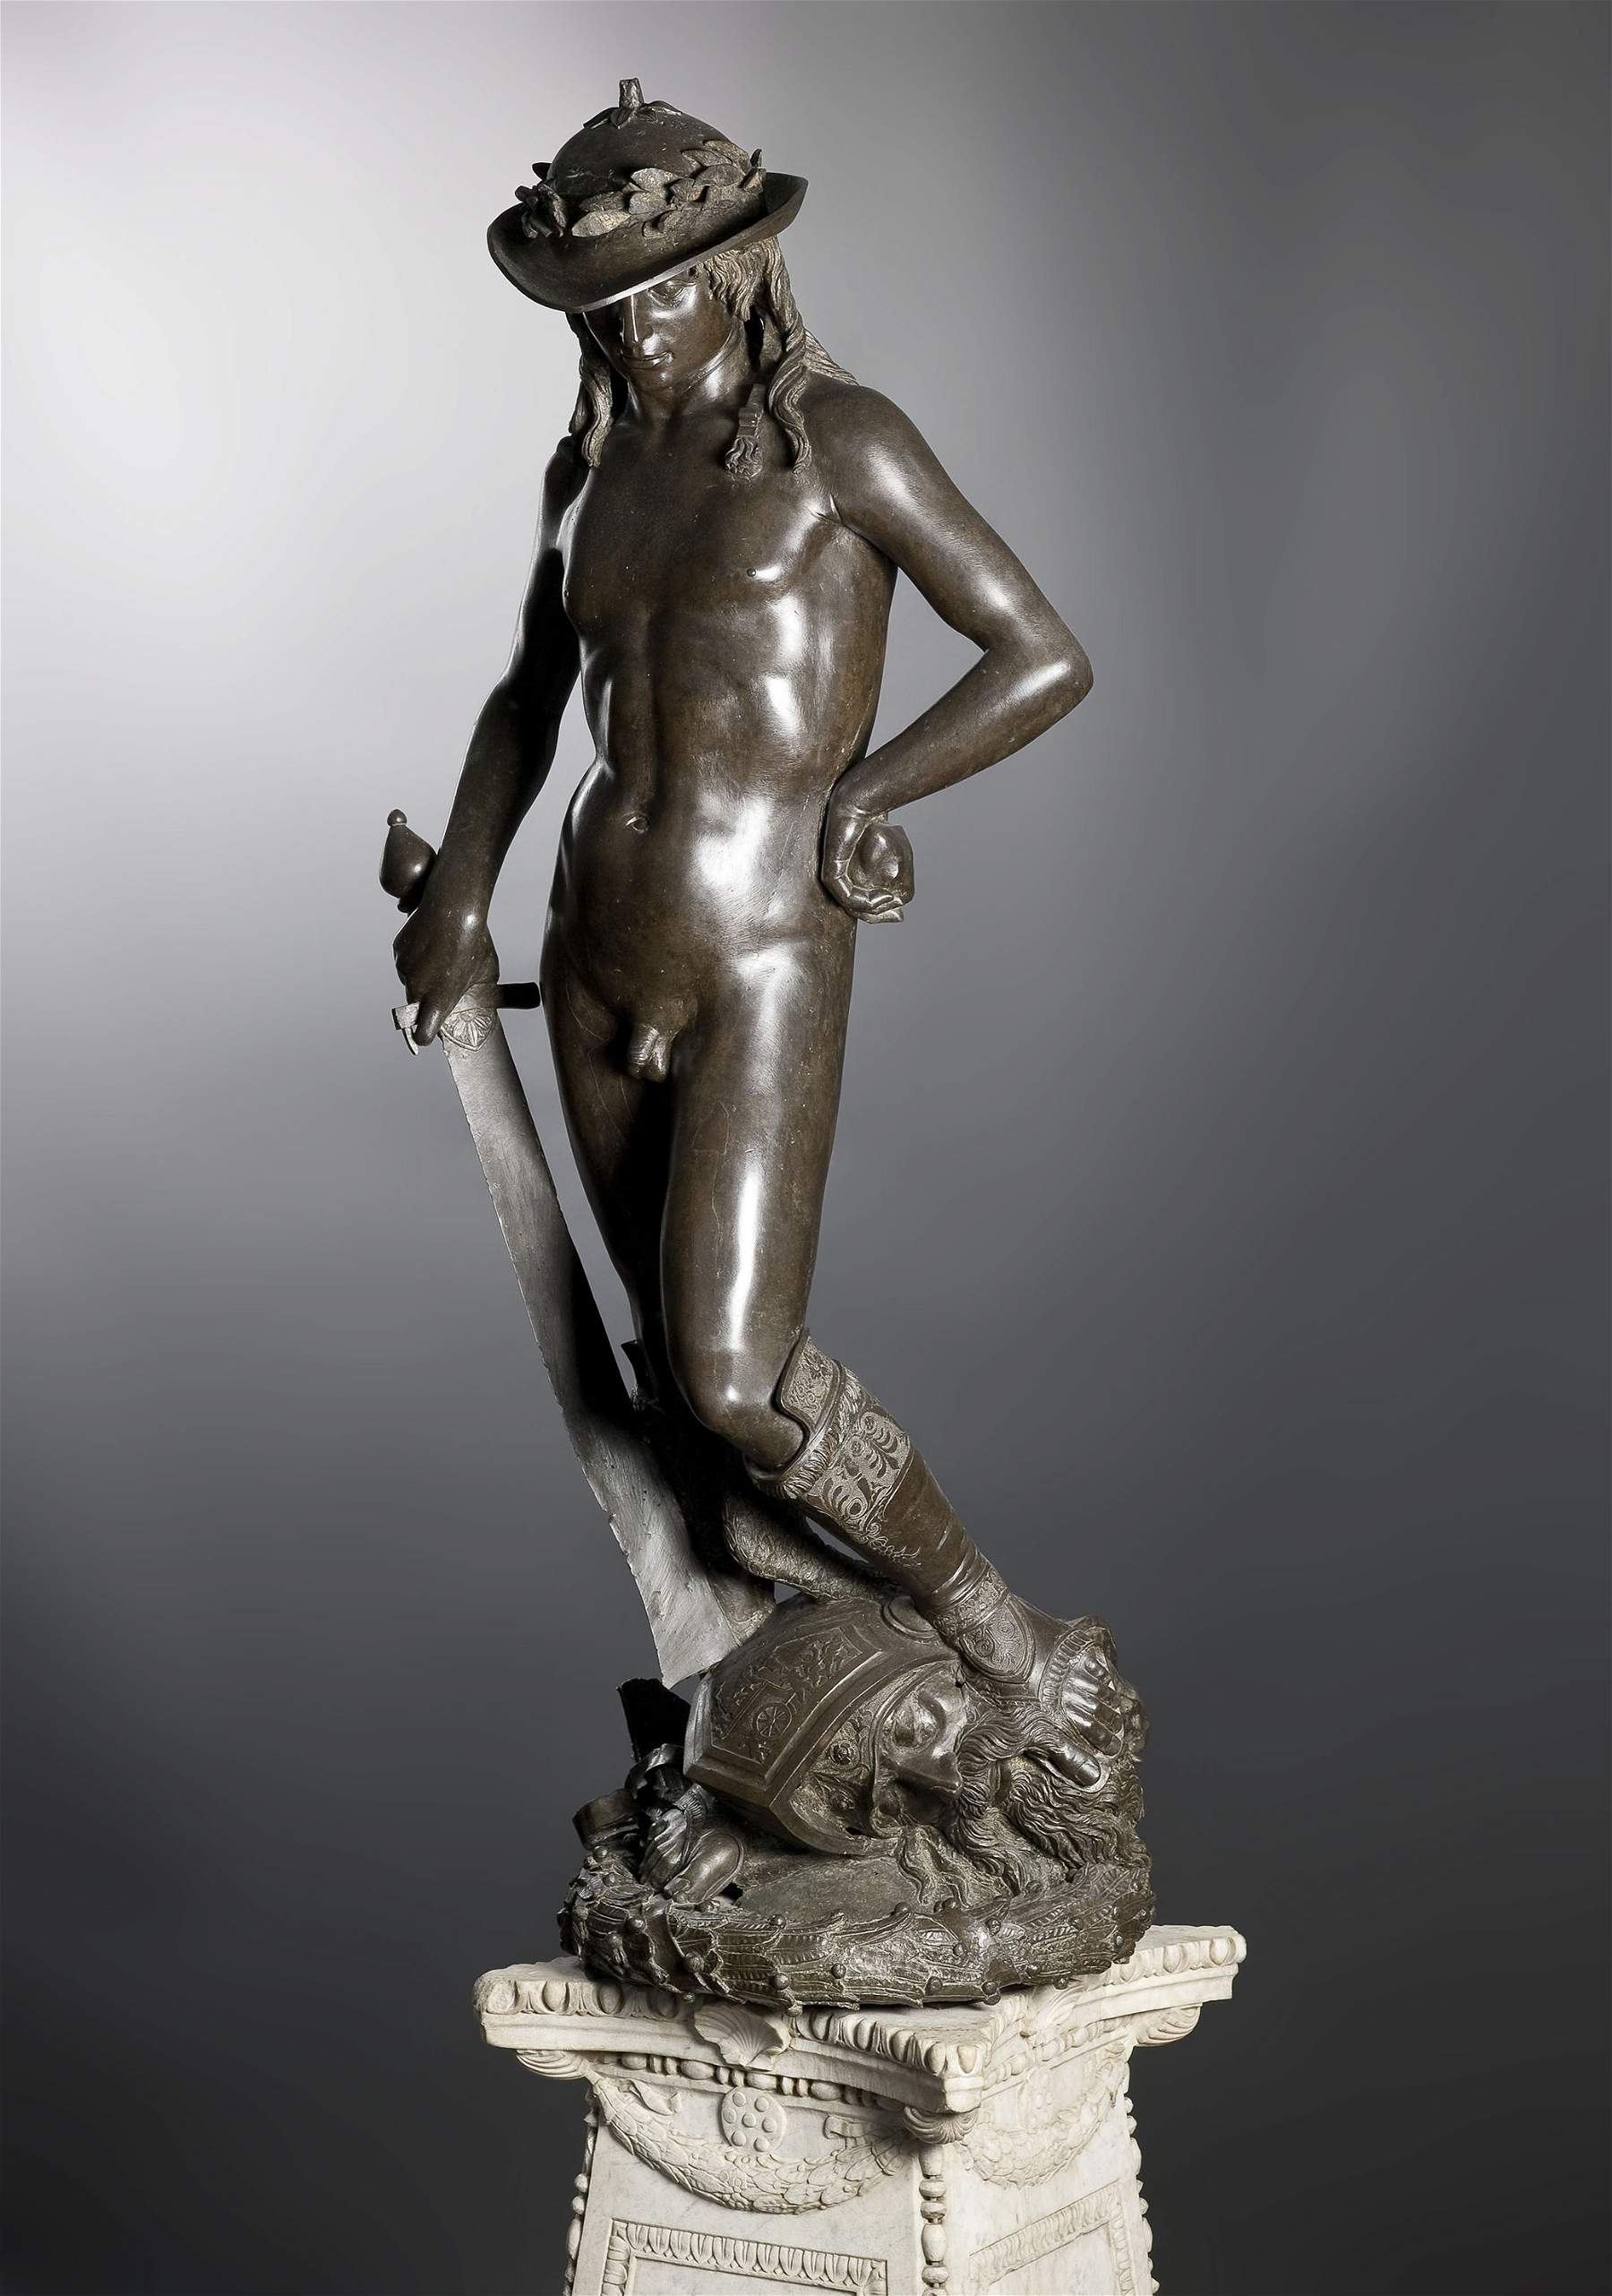 Donatello, the first Renaissance sculptor. Life, style, major works 